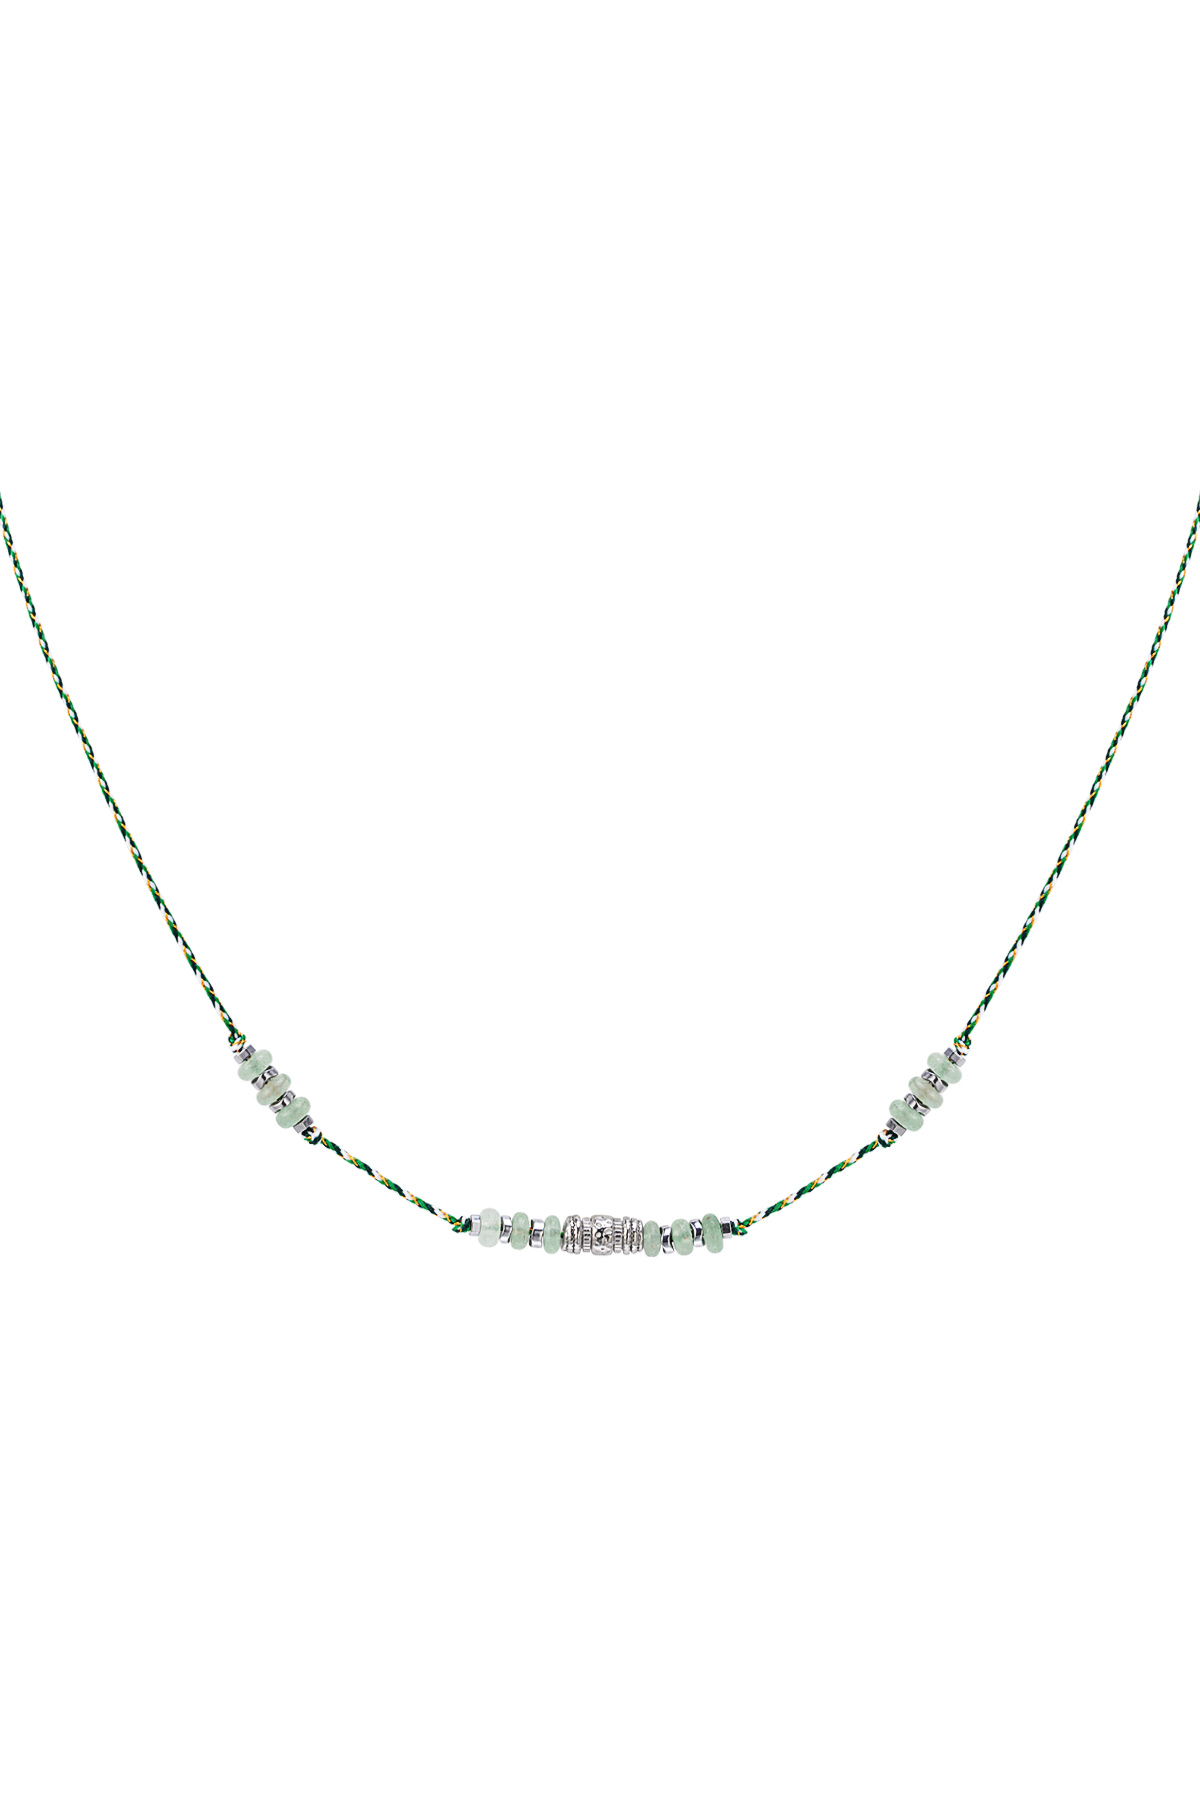 Necklace natural stones green Natural stones